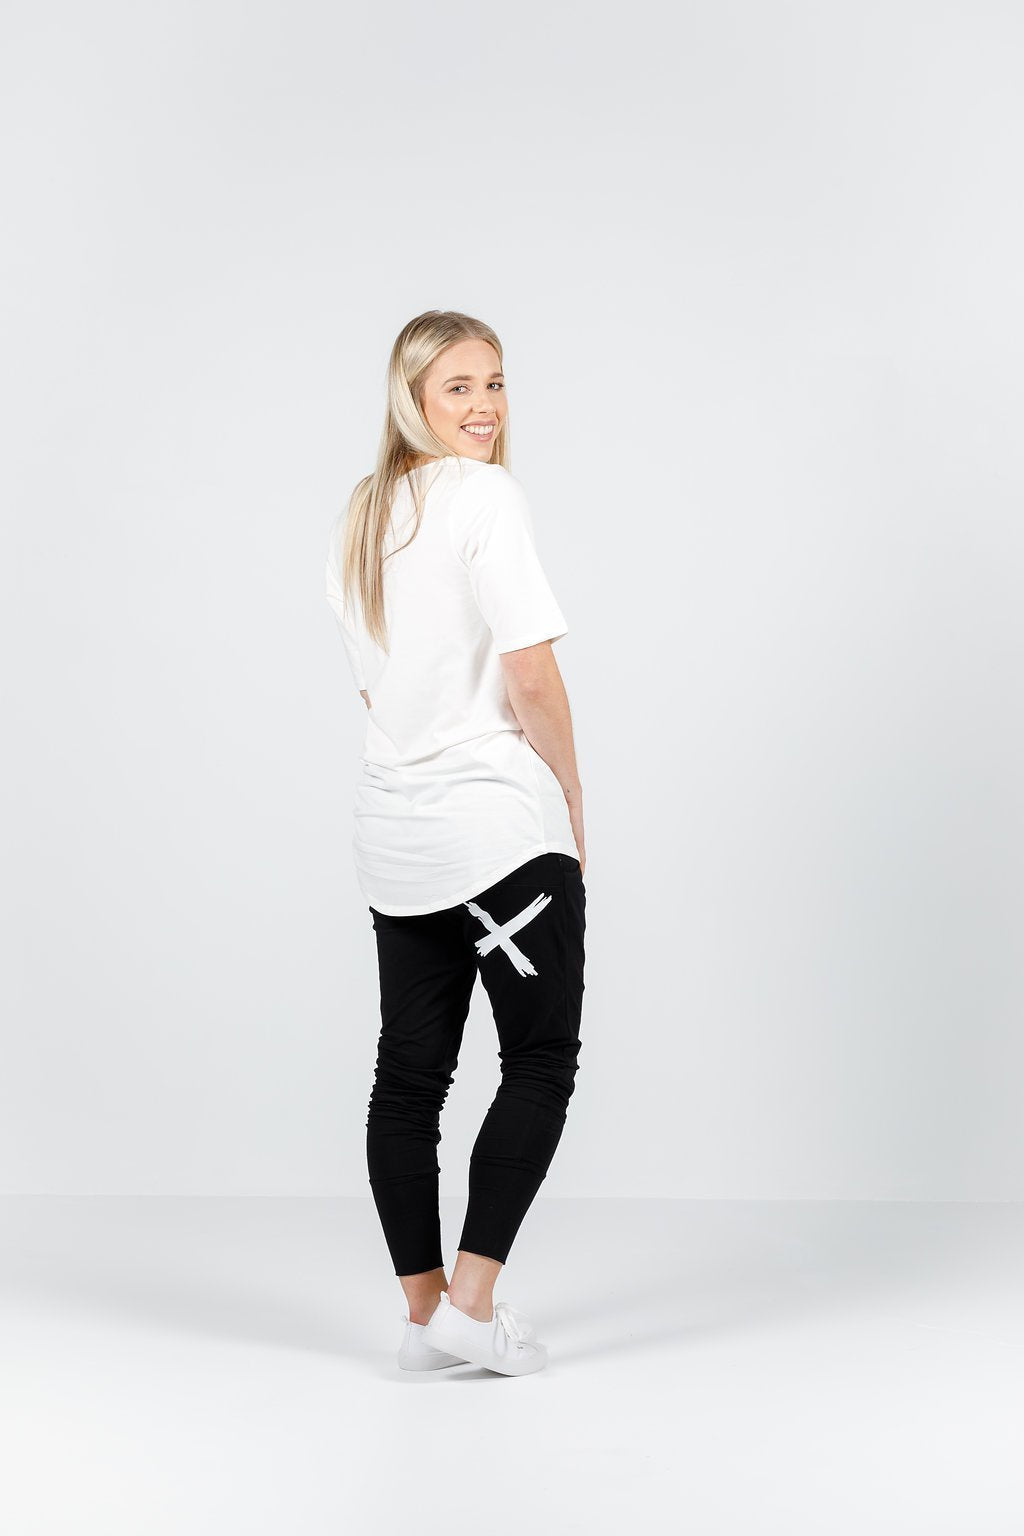 Home-Lee  Apartment  Pants  Black with  White X